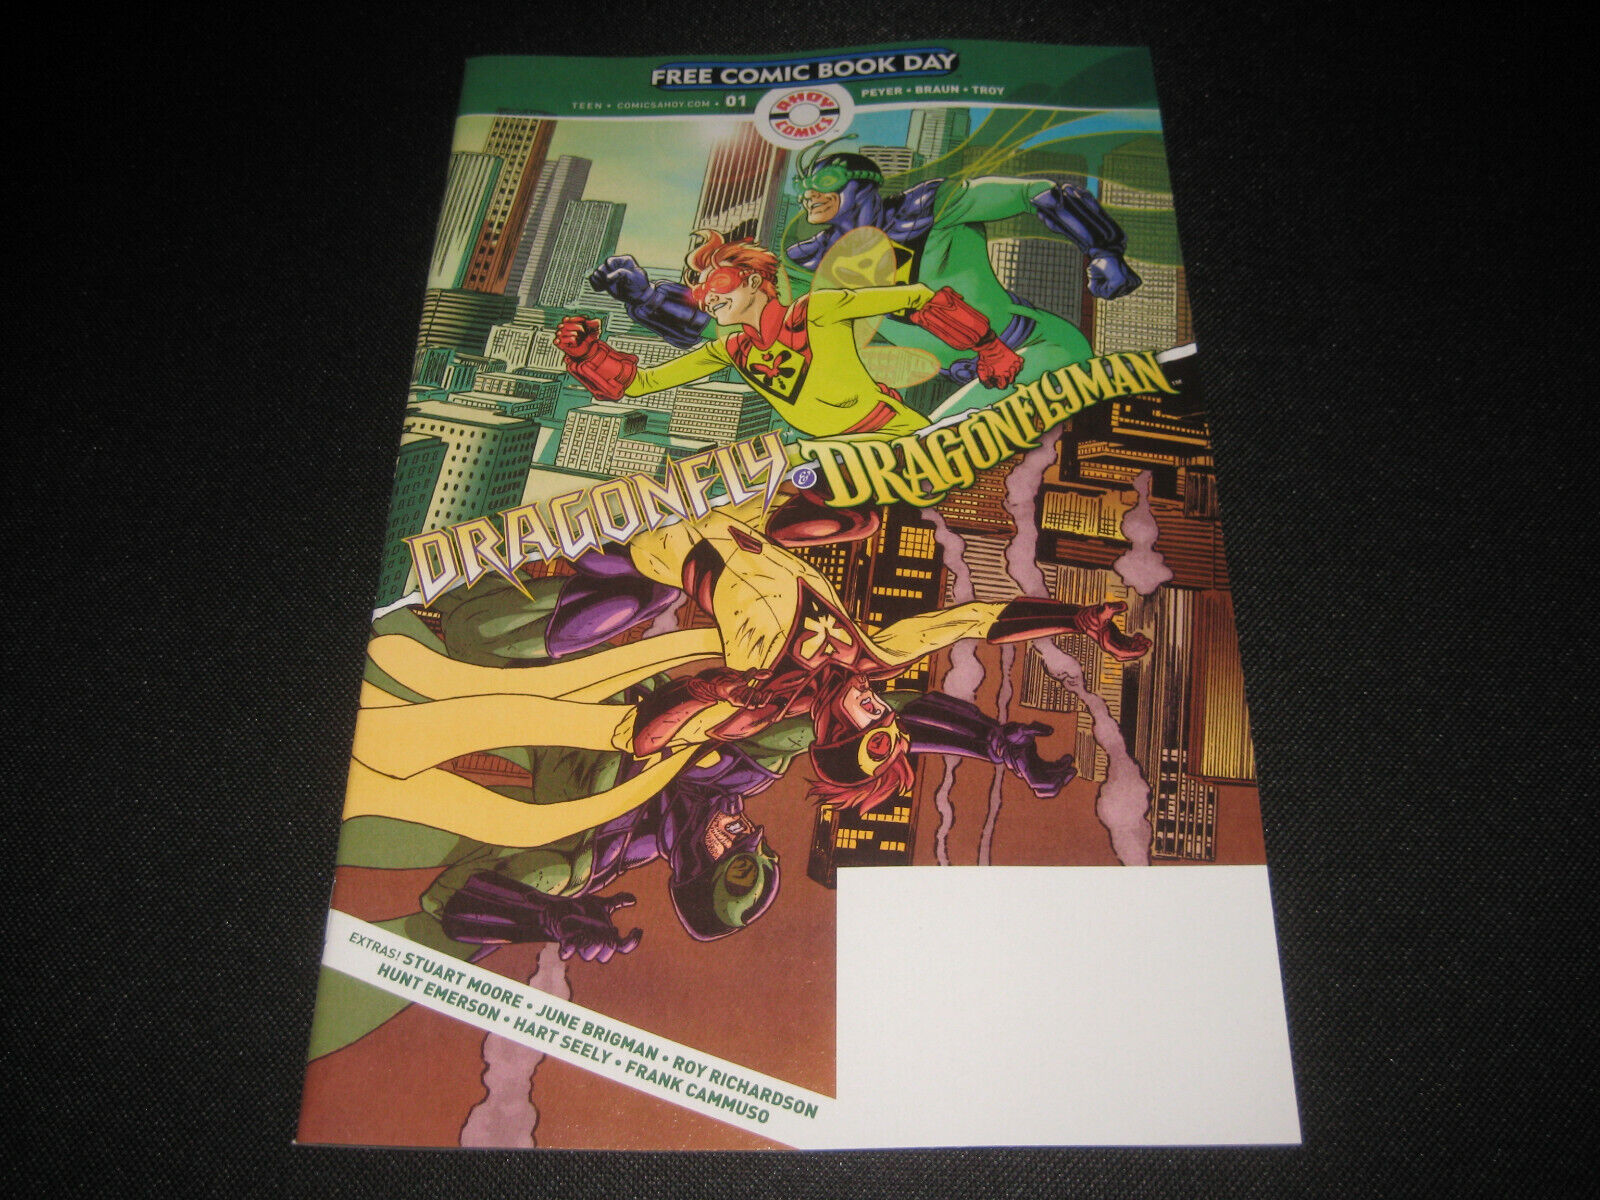 FREE COMIC BOOK DAY 2019 DRAGONFLY AND DRAGONFLYMAN (NEW) Tom Peyer Stuart Moore